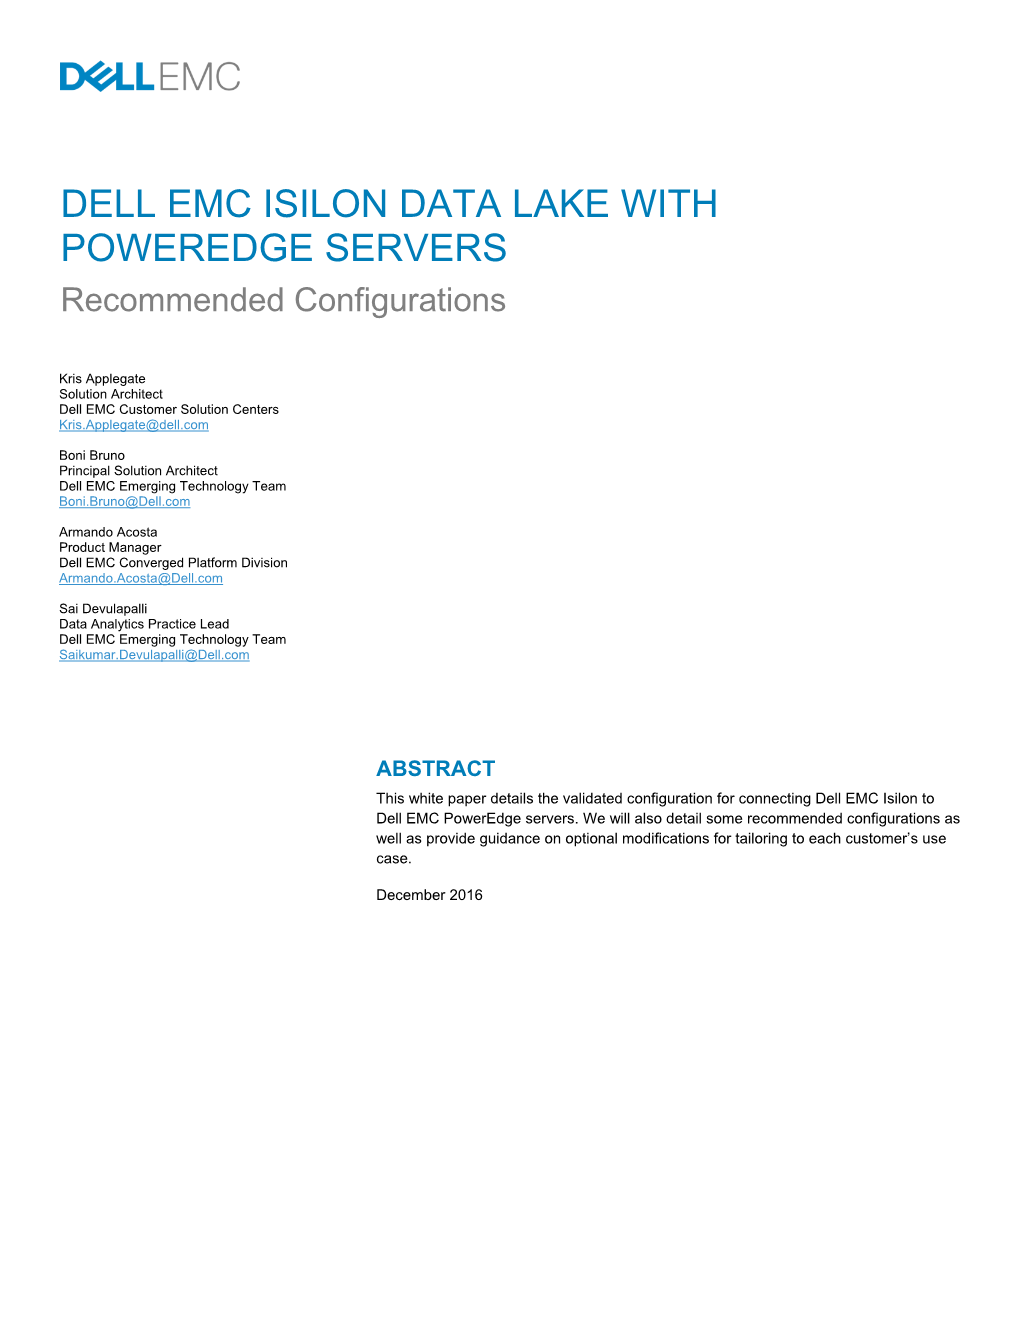 DELL EMC ISILON DATA LAKE with POWEREDGE SERVERS Recommended Configurations